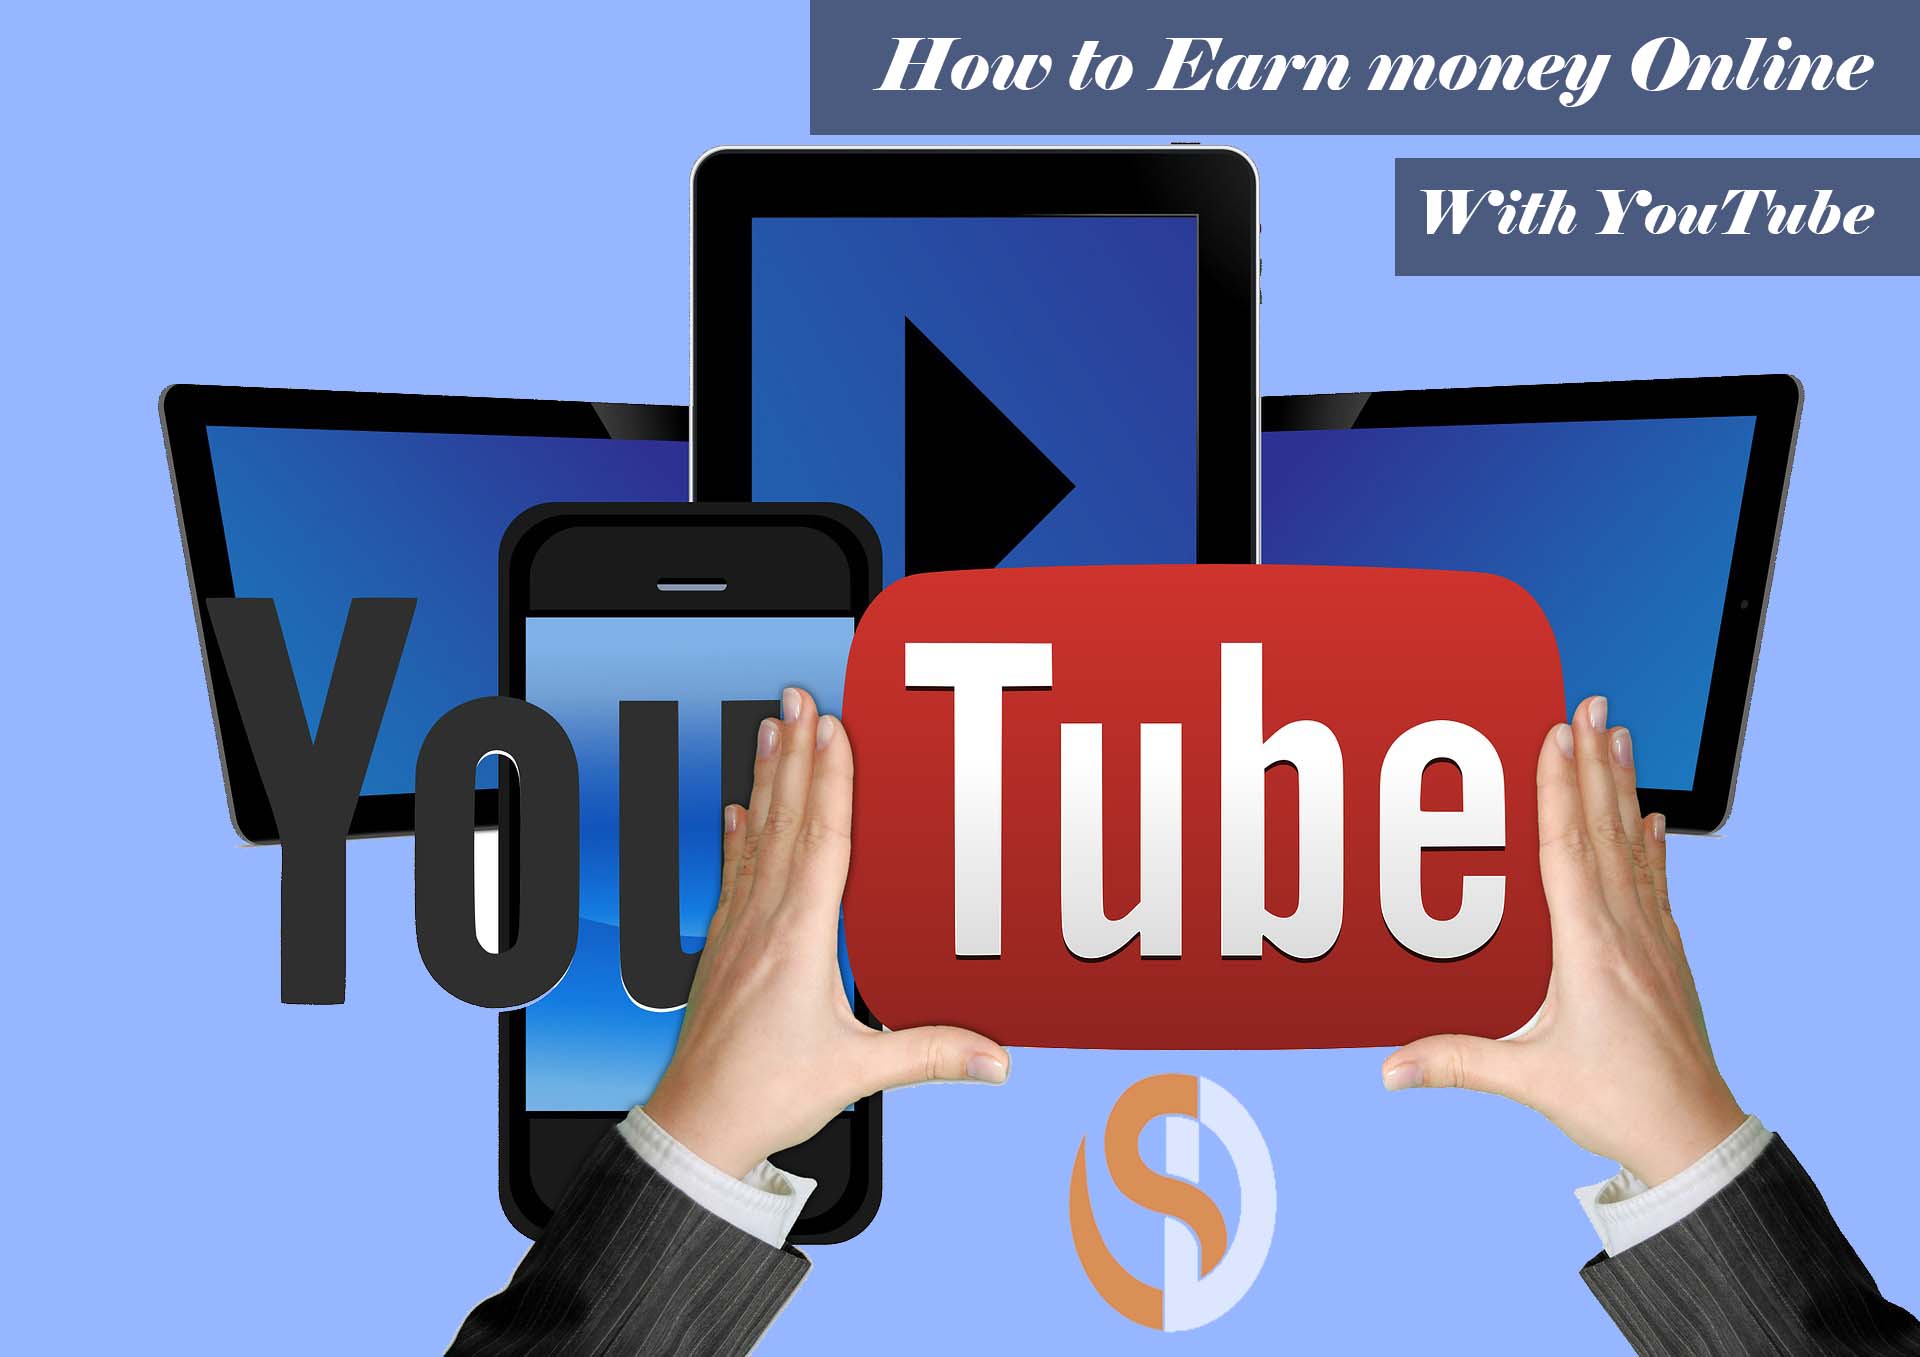 How to Earn money Online - With YouTube